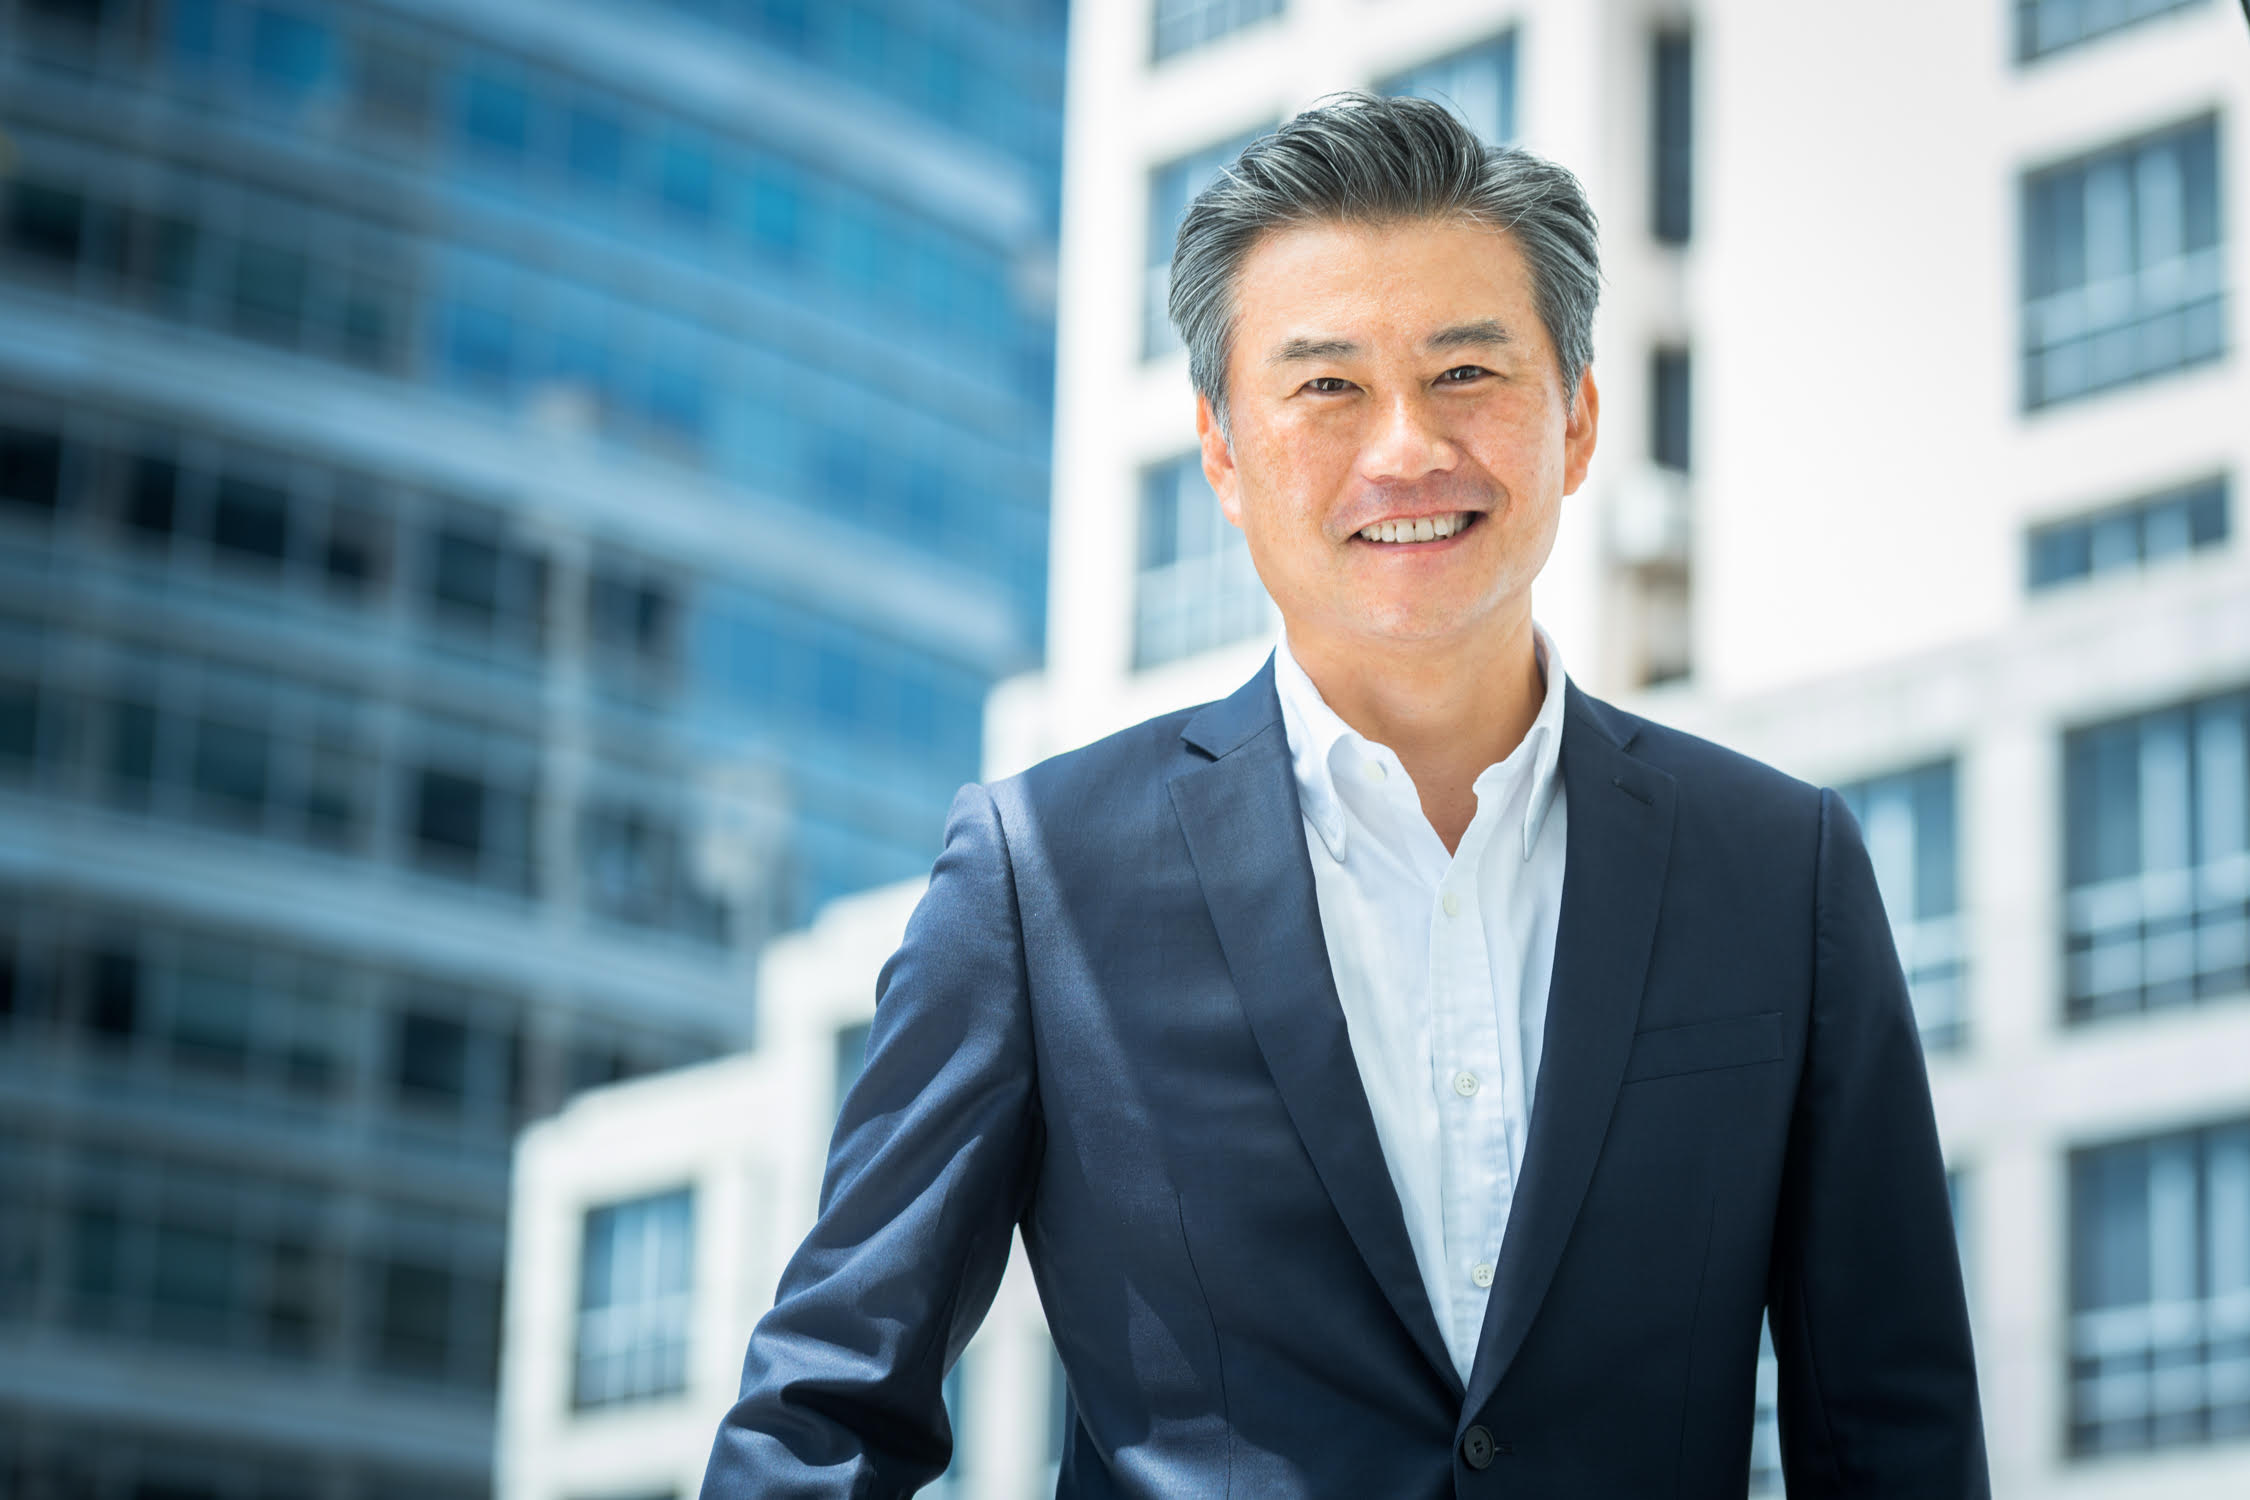 Man in a formal corporate suit poses for his headshot in front of office building during a professional headshot photoshoot in Singapore, White Room Studio. Credit: White Room Studio